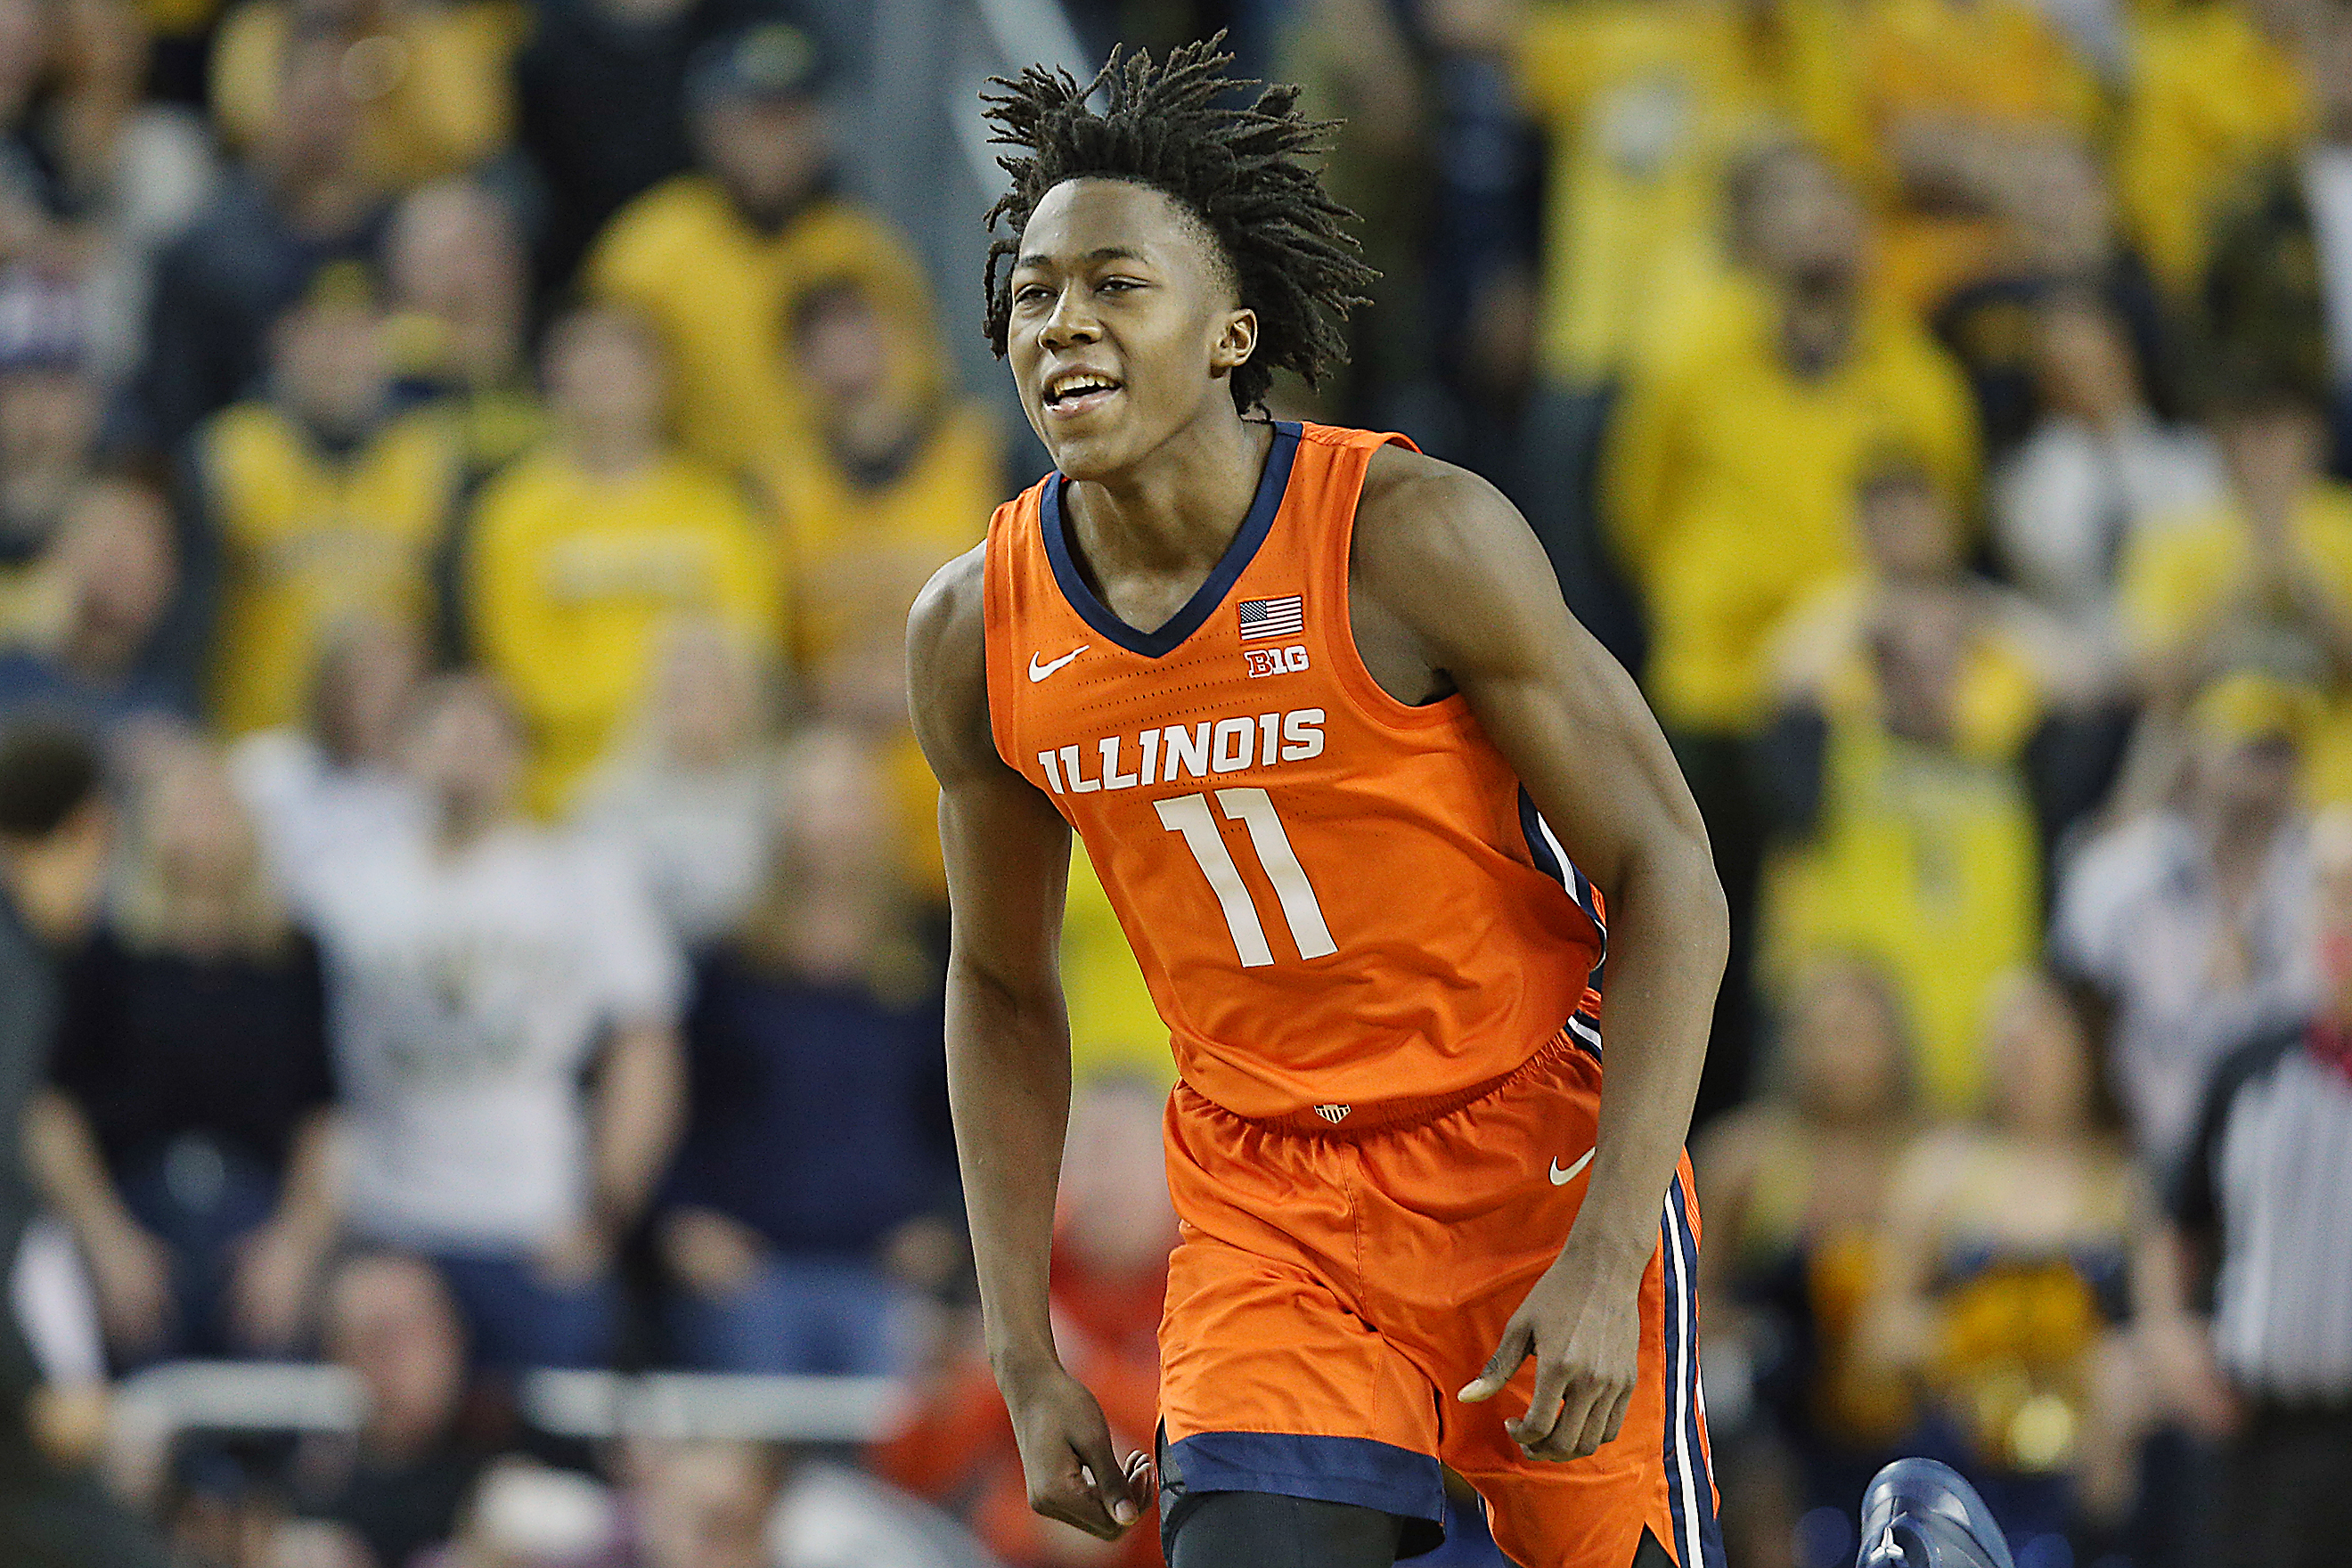 Illinois at Michigan free live stream (3/2/21) How to watch Top 5 college basketball, time, channel